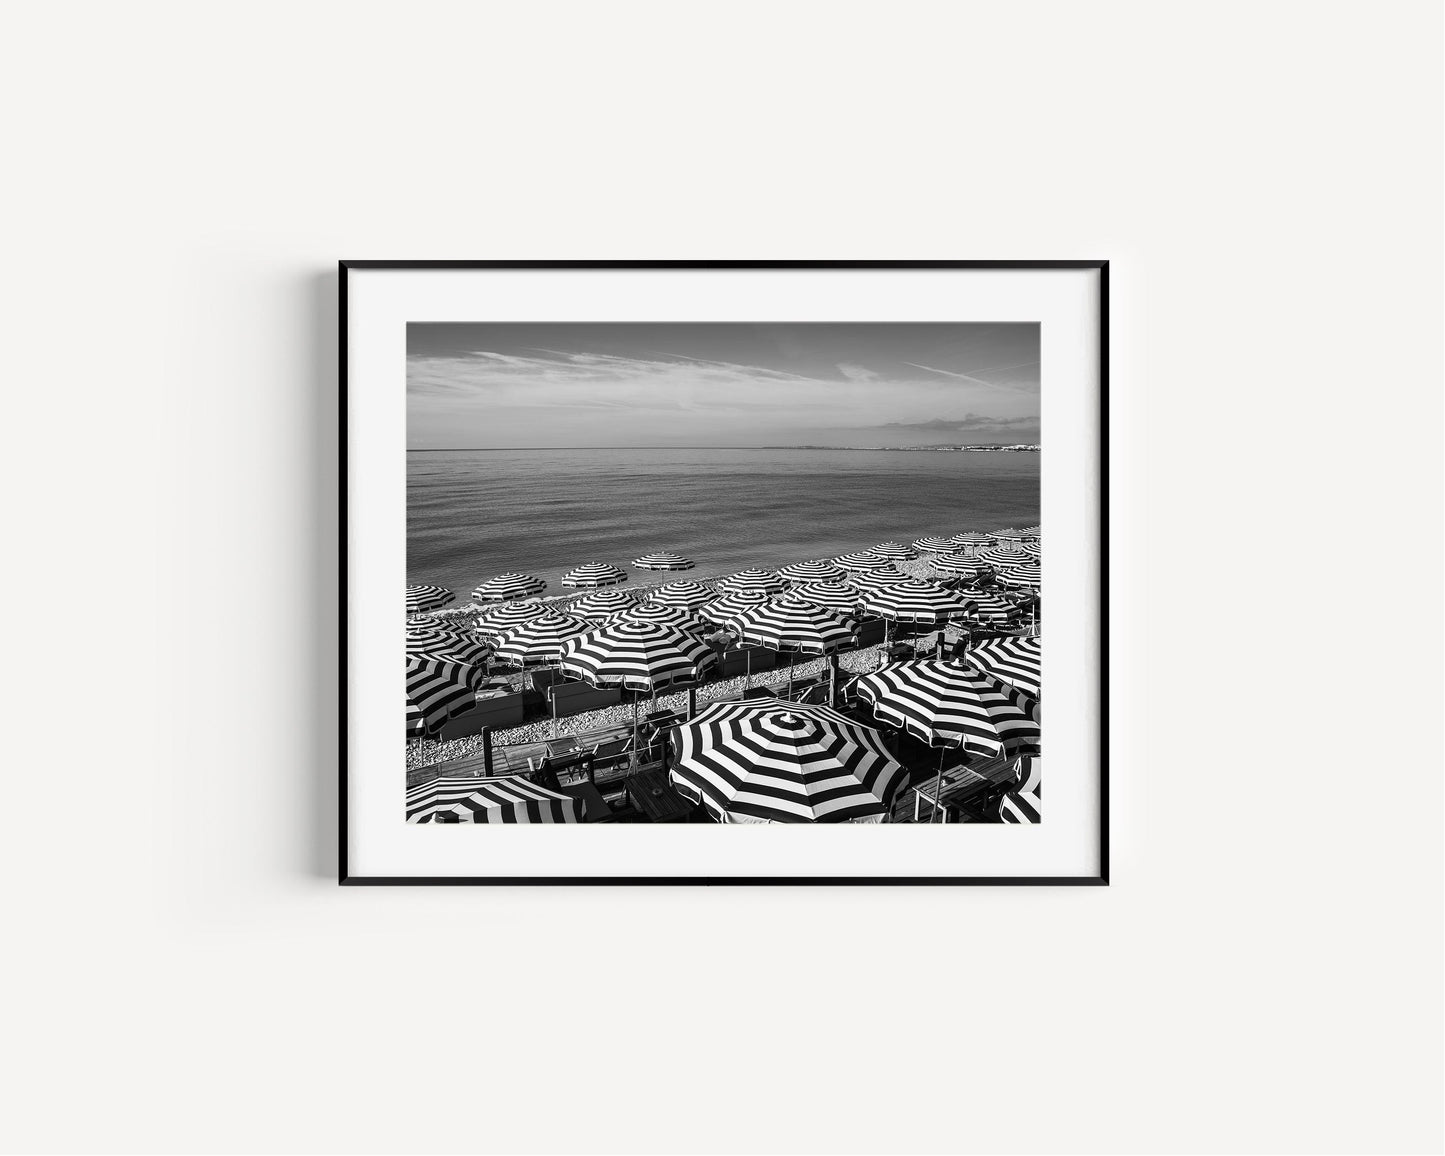 Black and White Striped Beach Umbrellas III | French Riviera Photography Print - Departures Print Shop